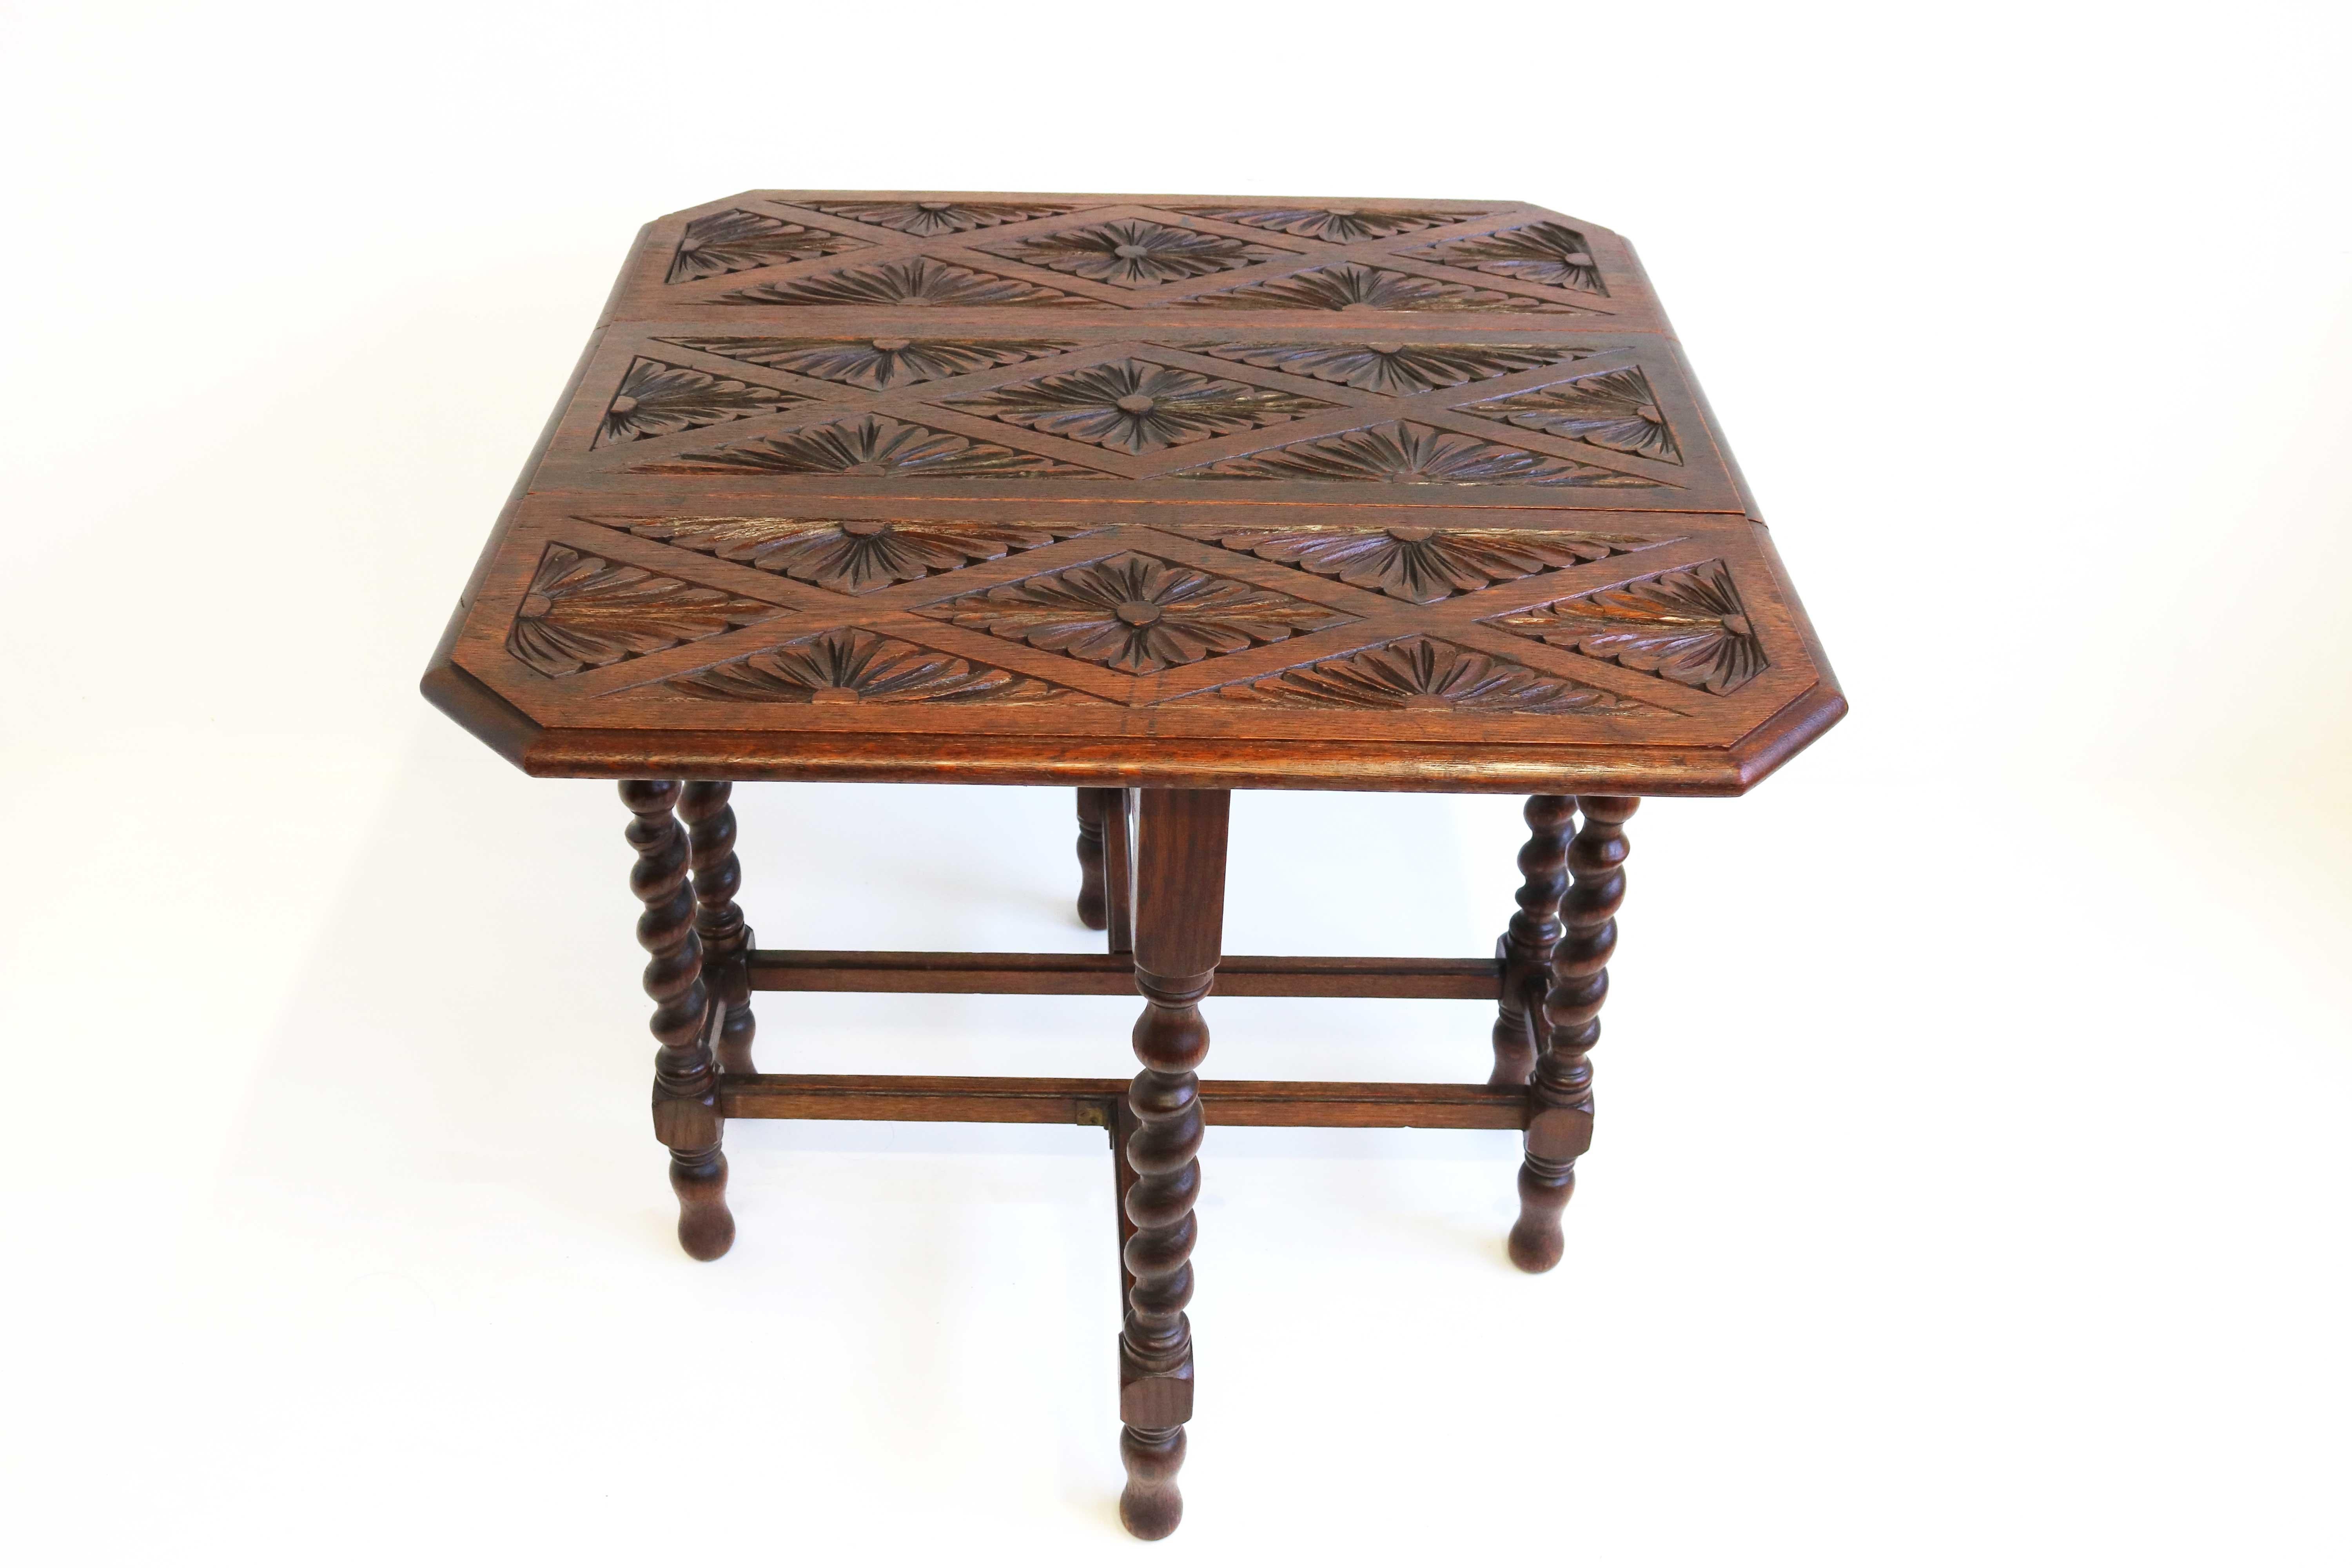 Lovely Small Antique English Barley Twist Oak Side Sofa Wine Table Drop Leaf Gate -Leg Flower Carved Square Top Late 19th Century 

Beautiful English oak wood-carved and barley twisted antique gate leg table , late 19th century.
A charming size,